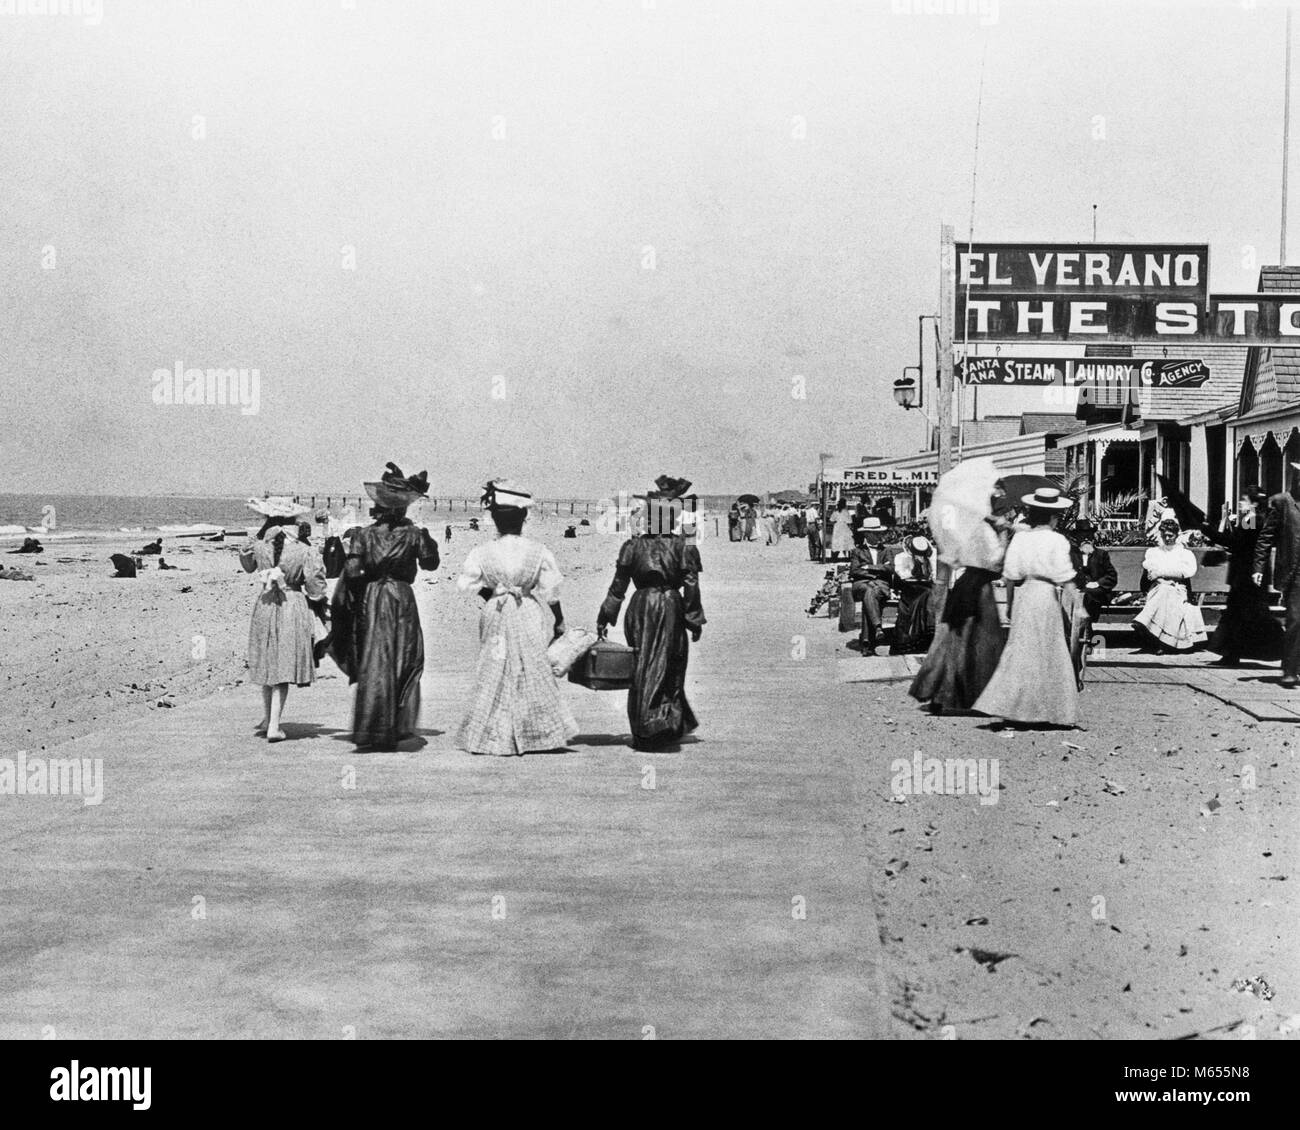 1910s 1912 PEOPLE STROLLING AWAY ON PAVED WALK ALONG BEACH NEWPORT BEACH CALIFORNIA USA - asp hp5396 ASP001 HARS BOARDWALK LEISURE STYLES RELAXATION ALONG RECREATION SEASIDE 1890s BEACHES FASHIONS WEST COAST ESCAPE STOREFRONT GROUP OF PEOPLE TURN OF CENTURY JUVENILES PACIFIC OCEAN 1912 B&W BLACK AND WHITE COASTAL LONG SKIRTS NEWPORT NEWPORT BEACH OLD FASHIONED PERSONS SOUTHERN CALIFORNIA Stock Photo